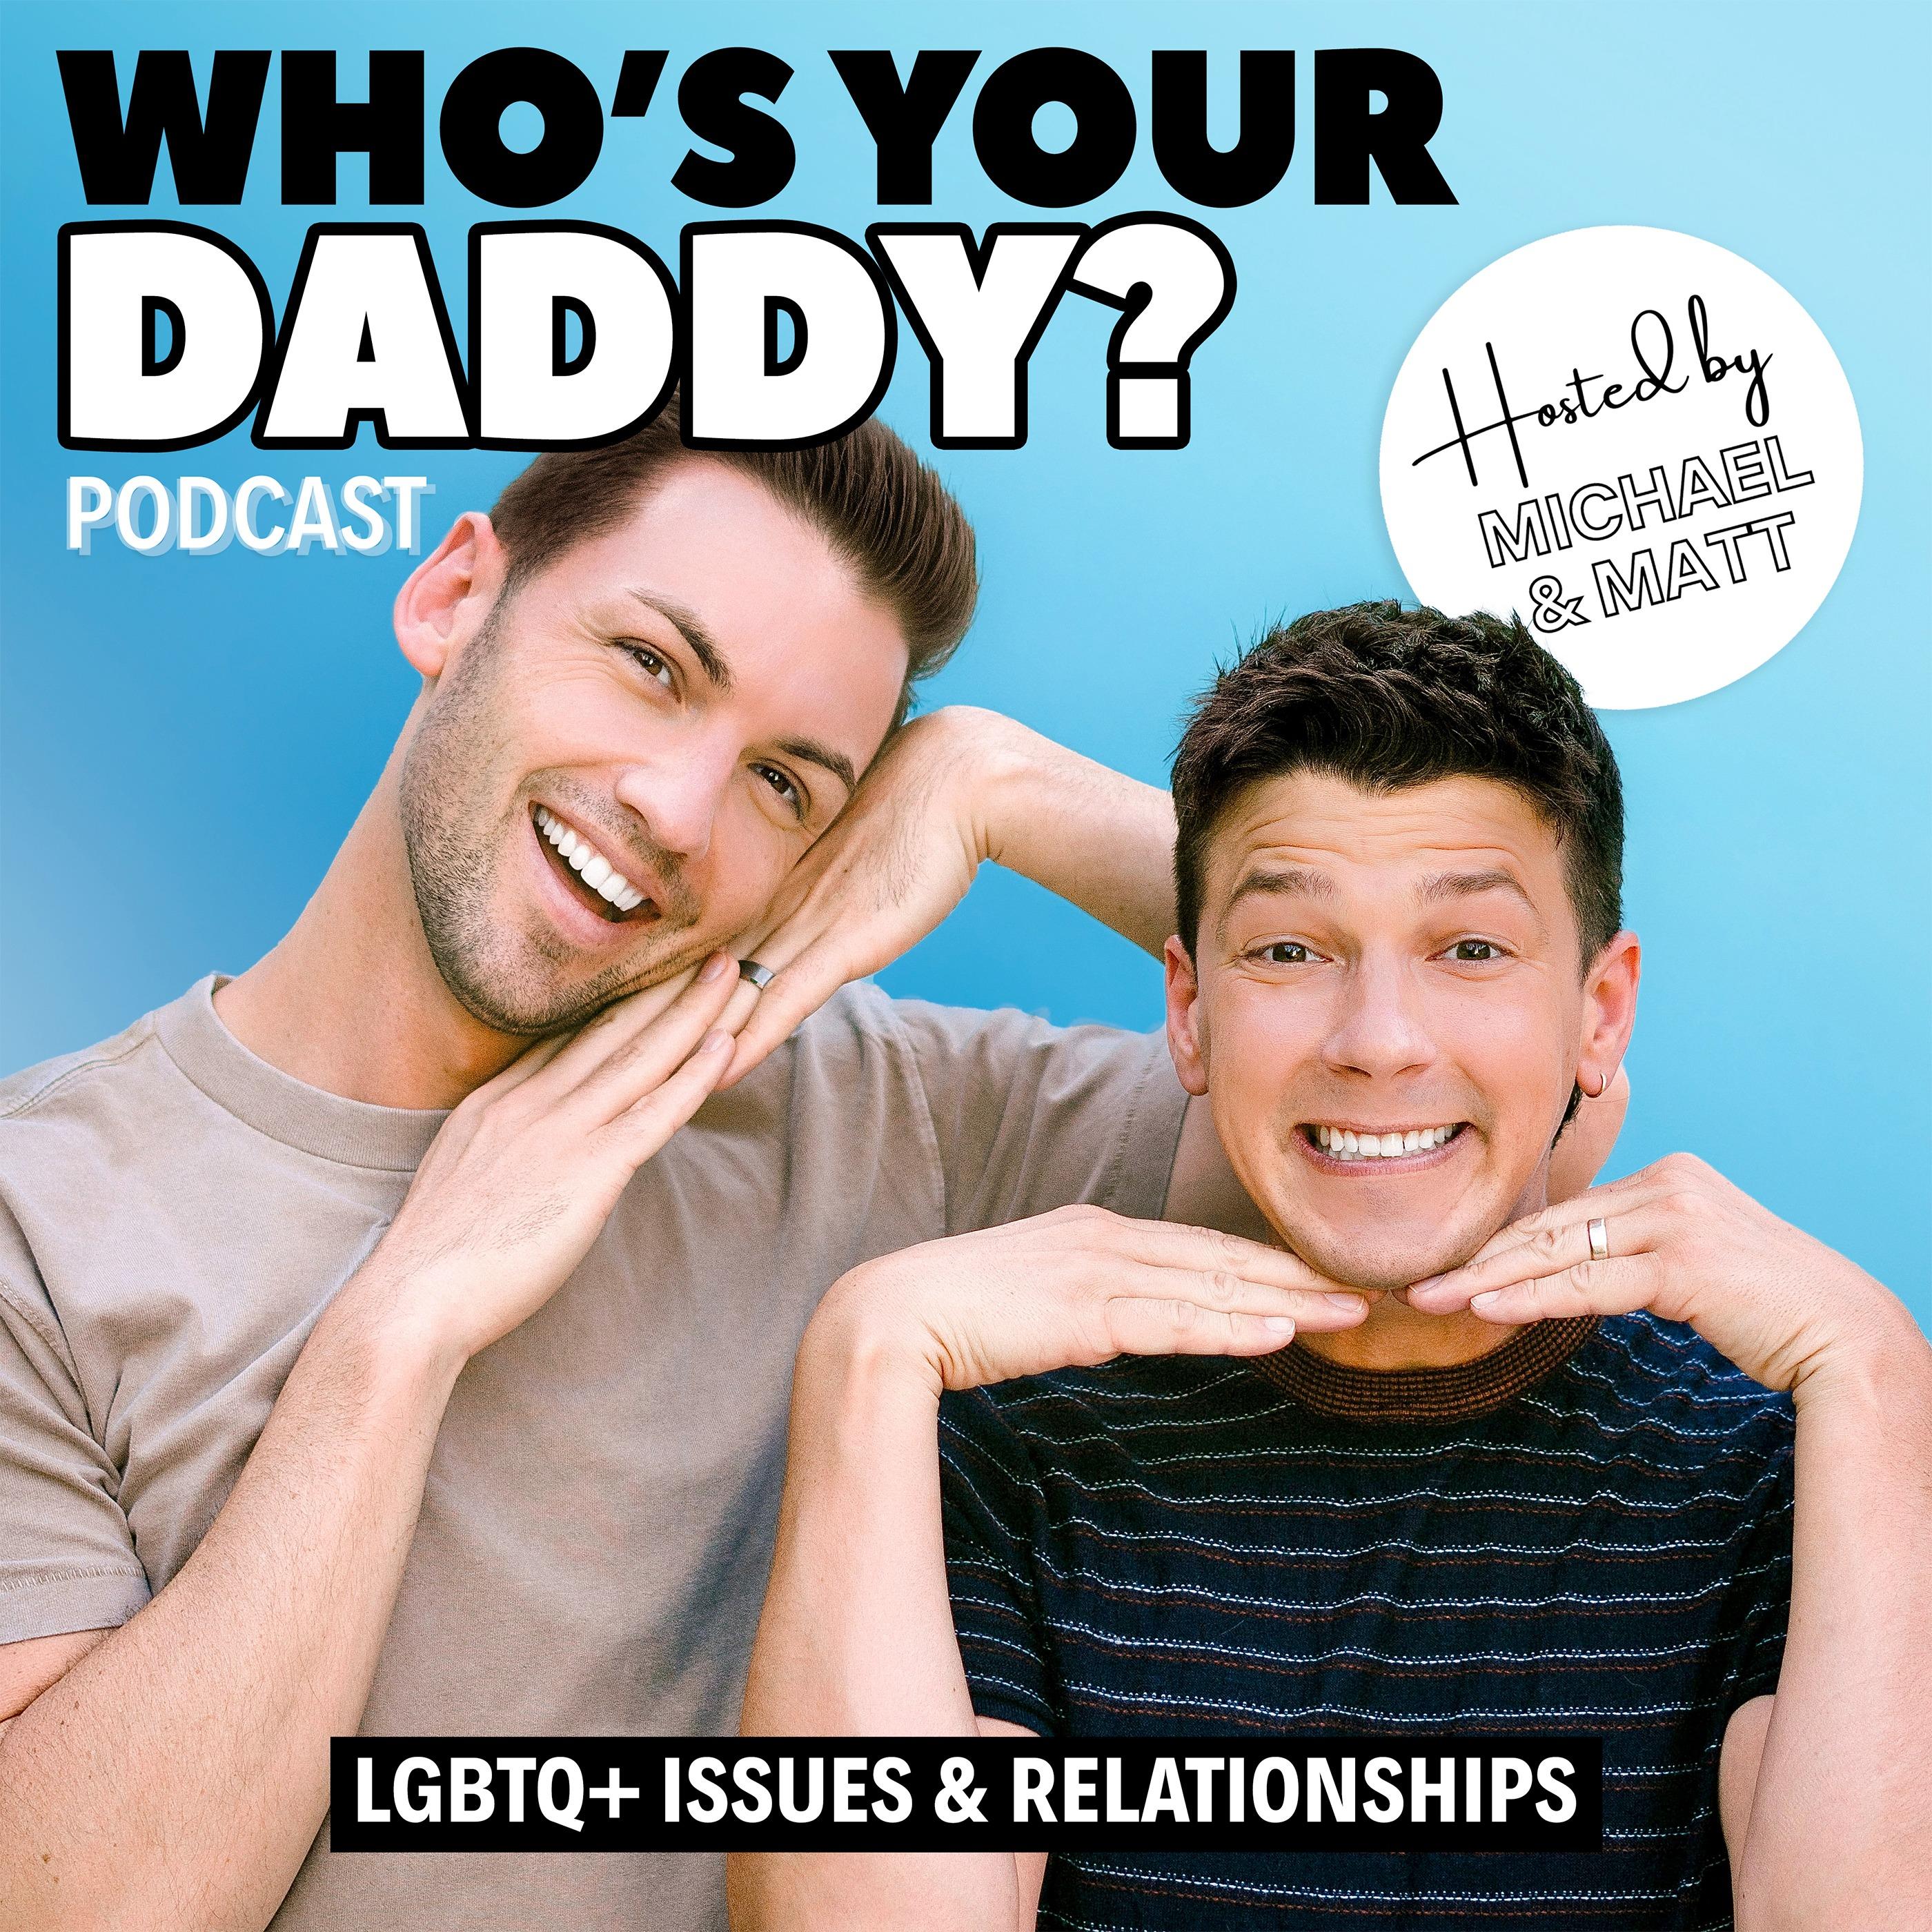 Who's Your Daddy Podcast